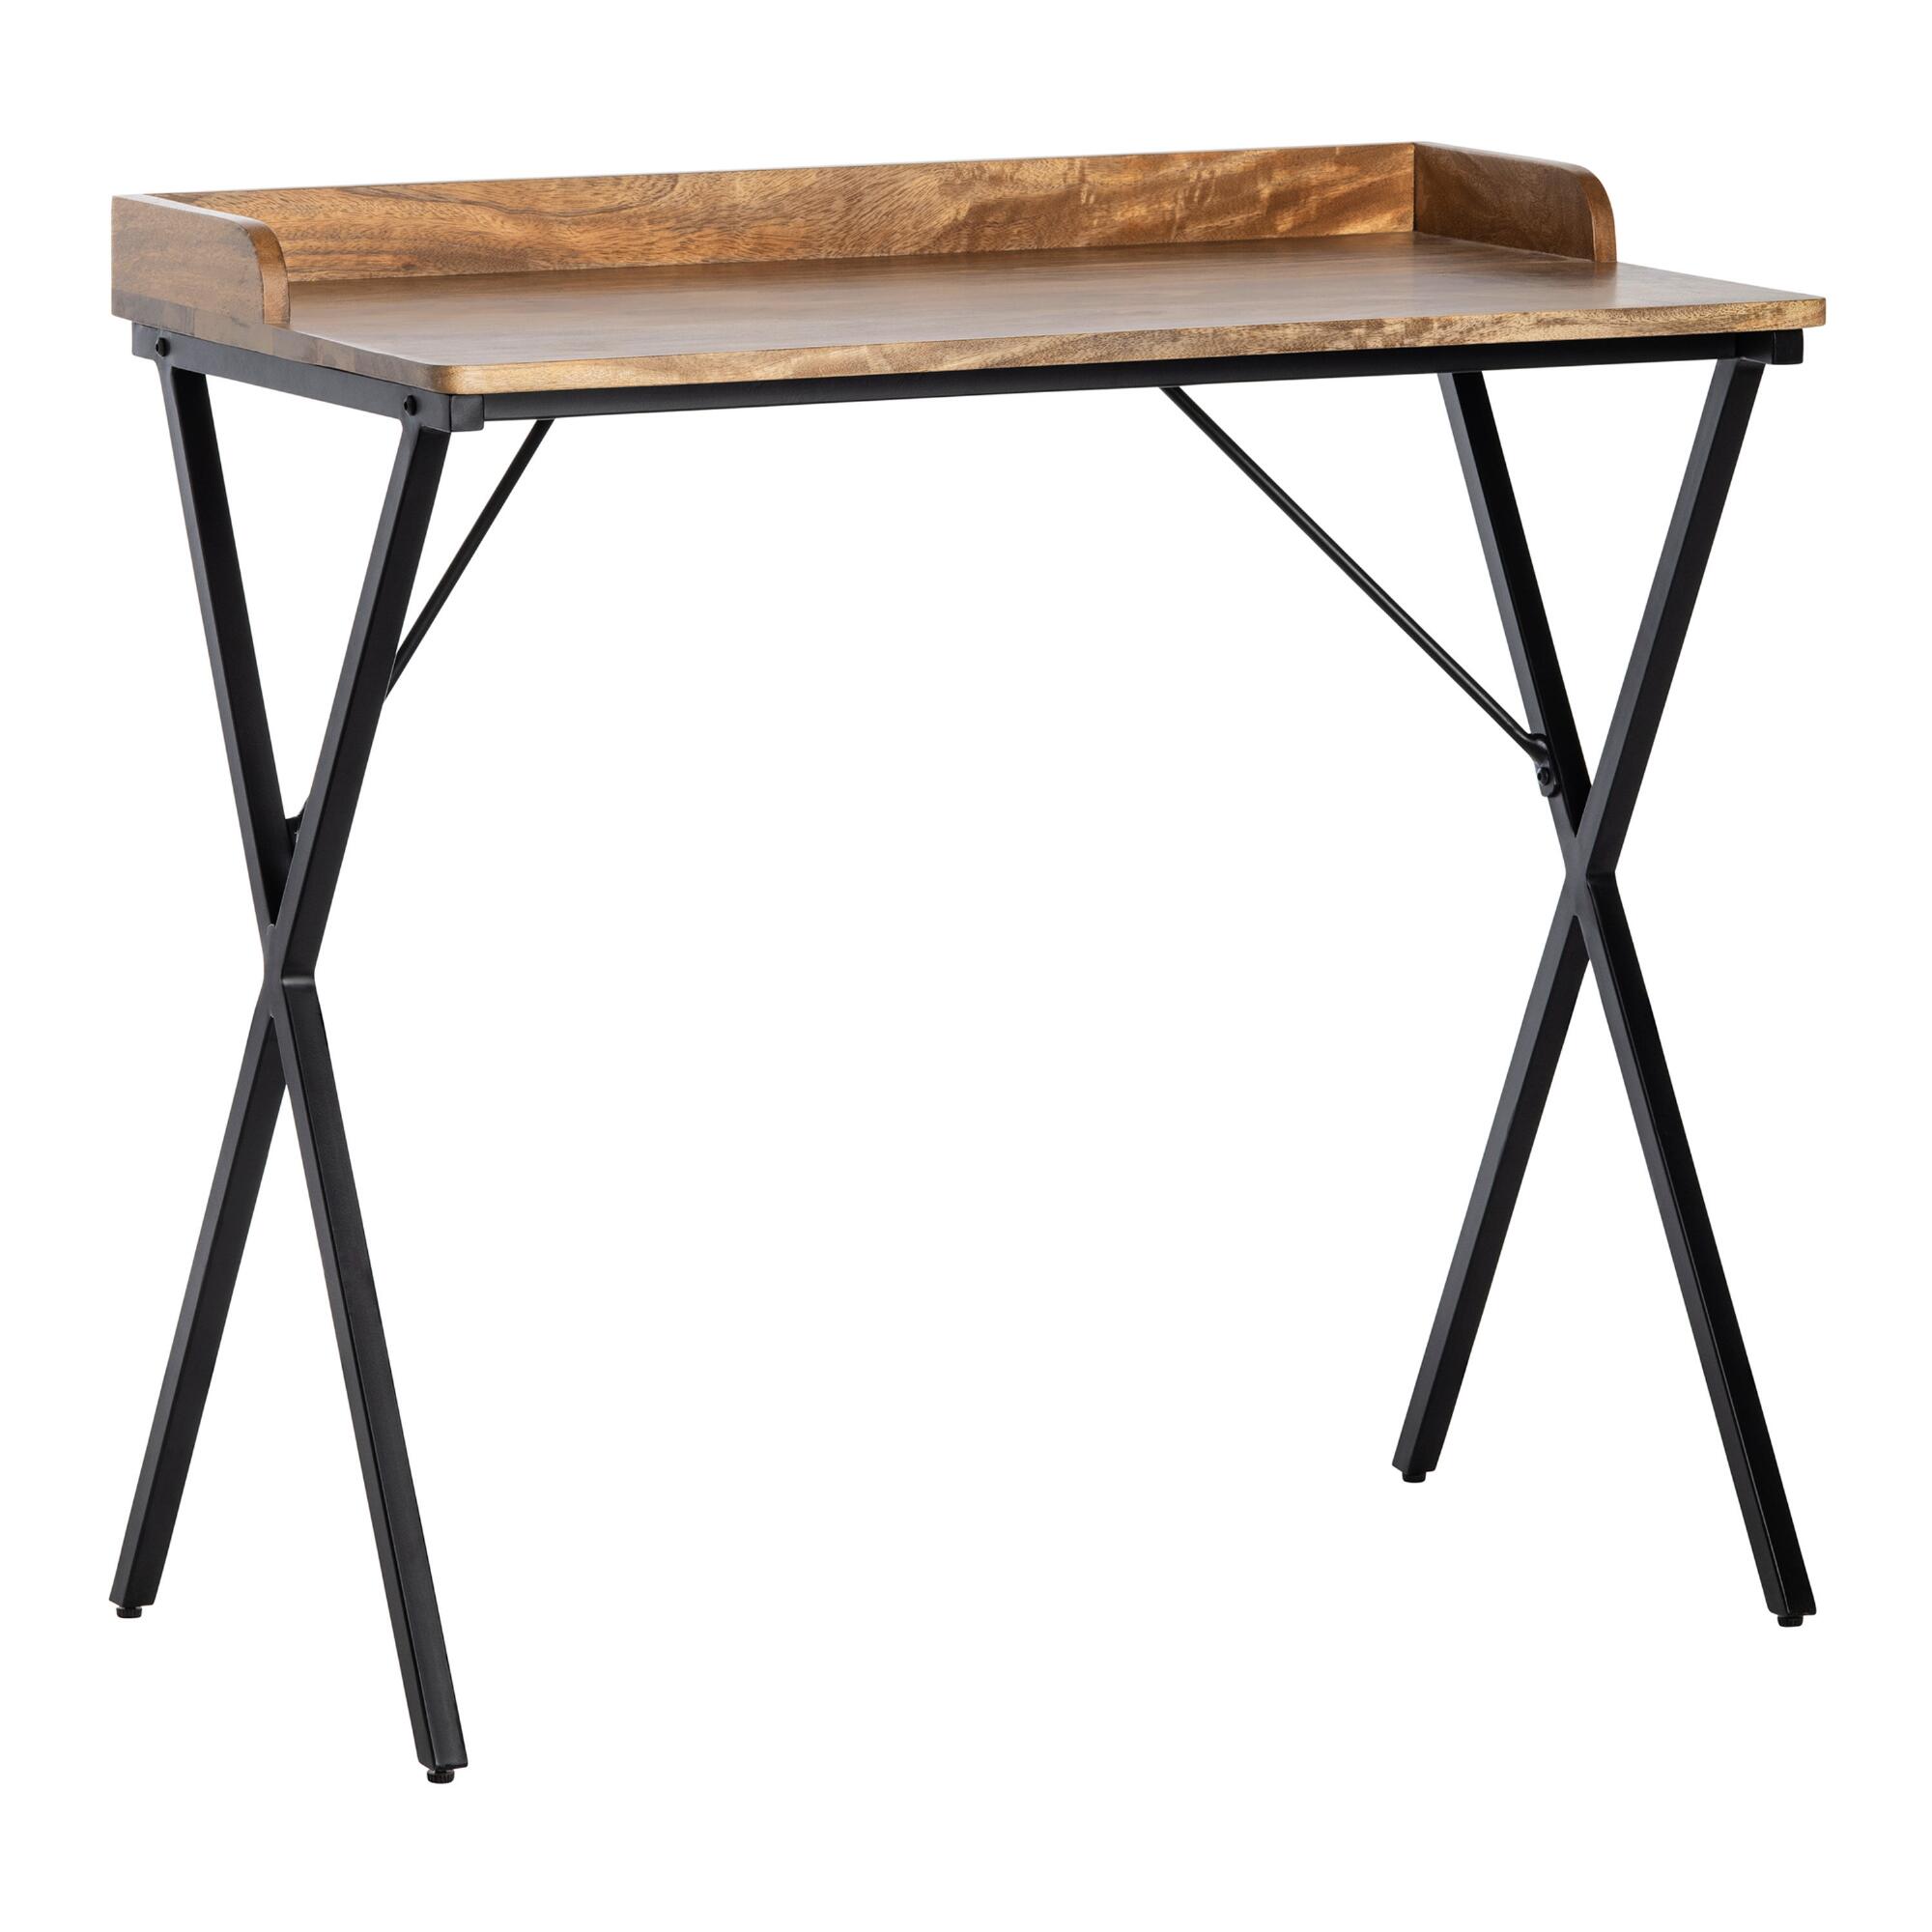 Wood And Iron Bryson Desk: Black/Brown by World Market